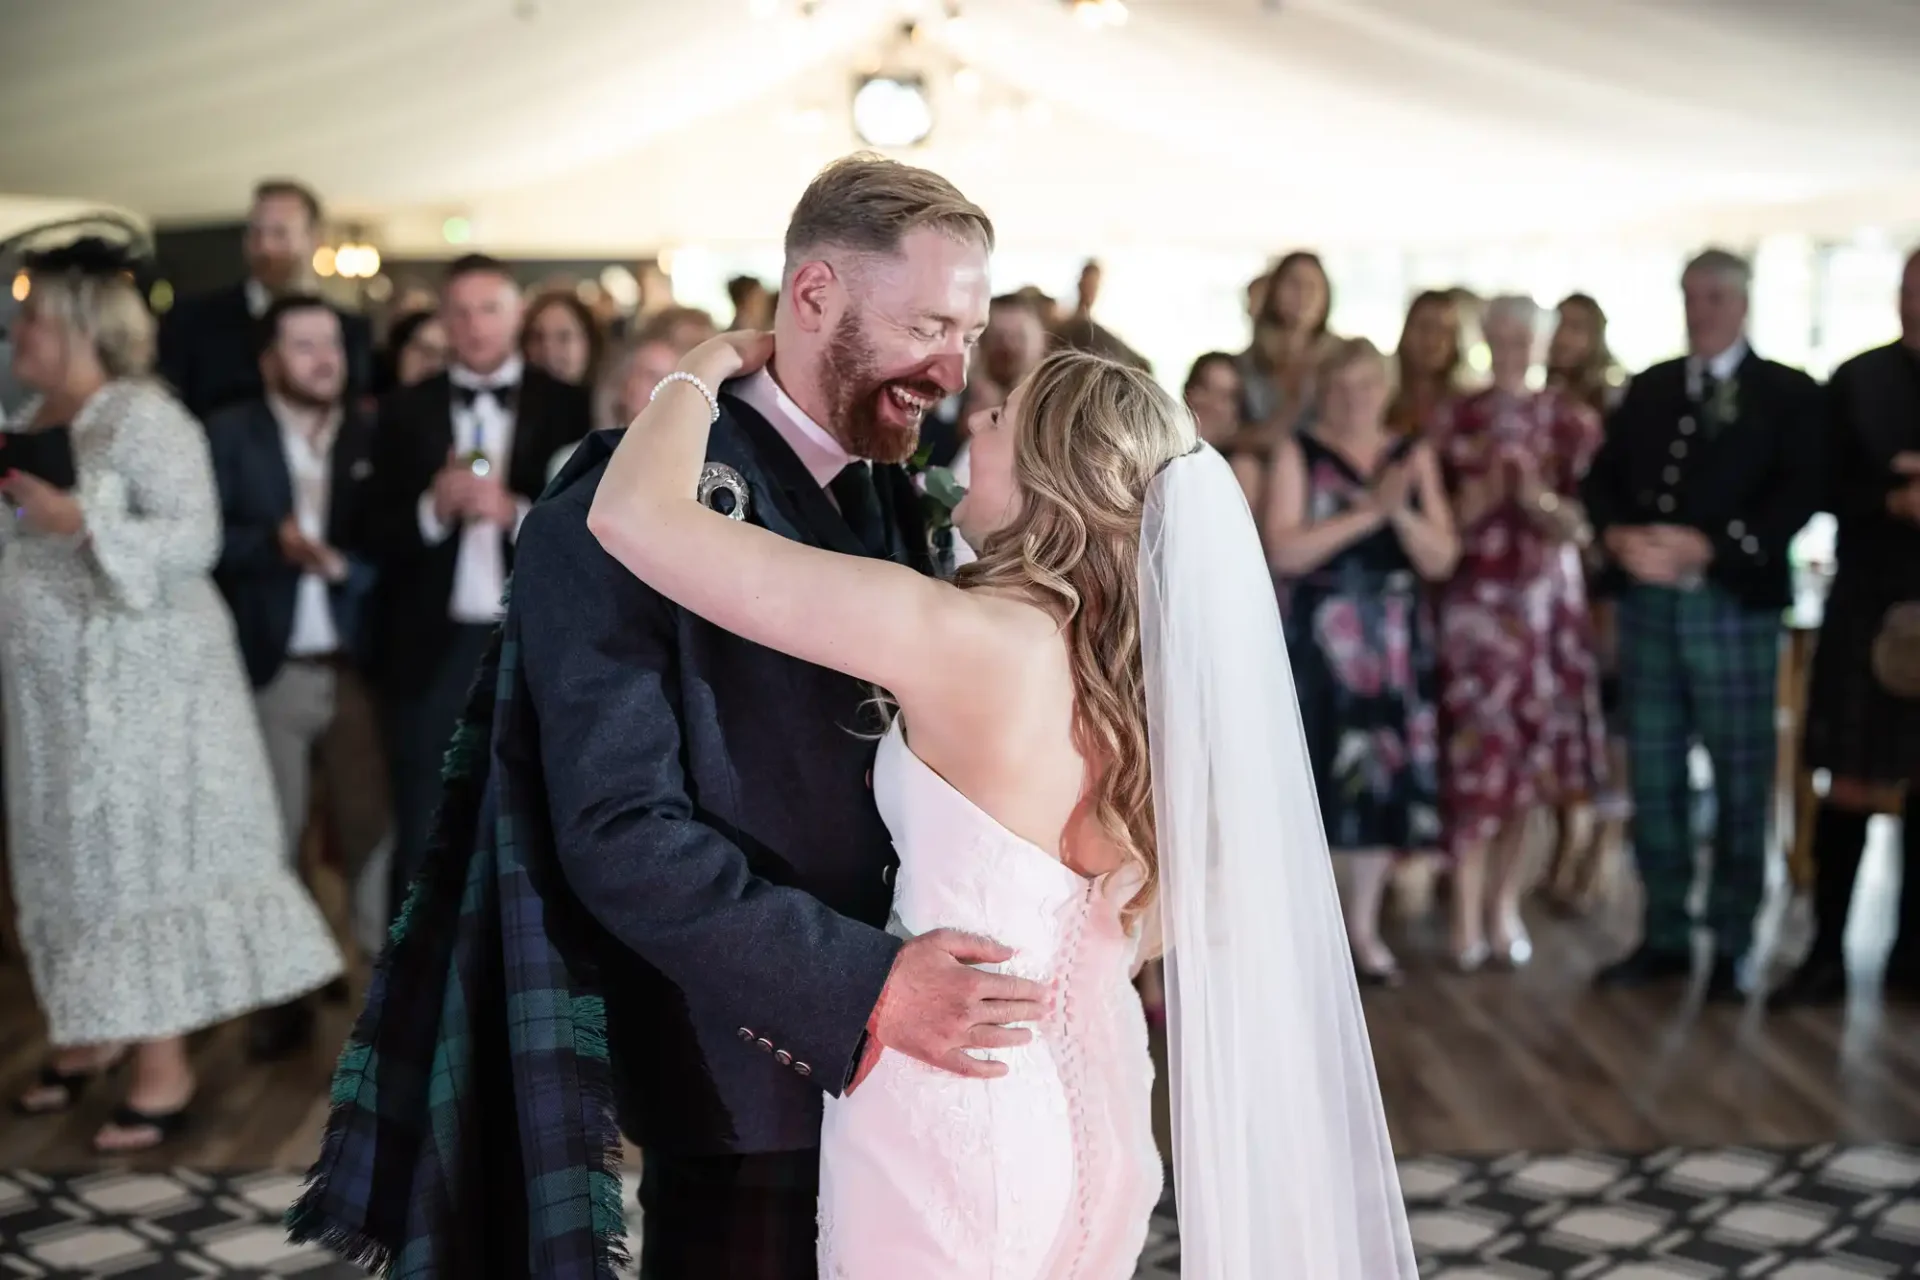 Bride and groom joyfully embracing during their wedding dance in a tent, surrounded by guests.